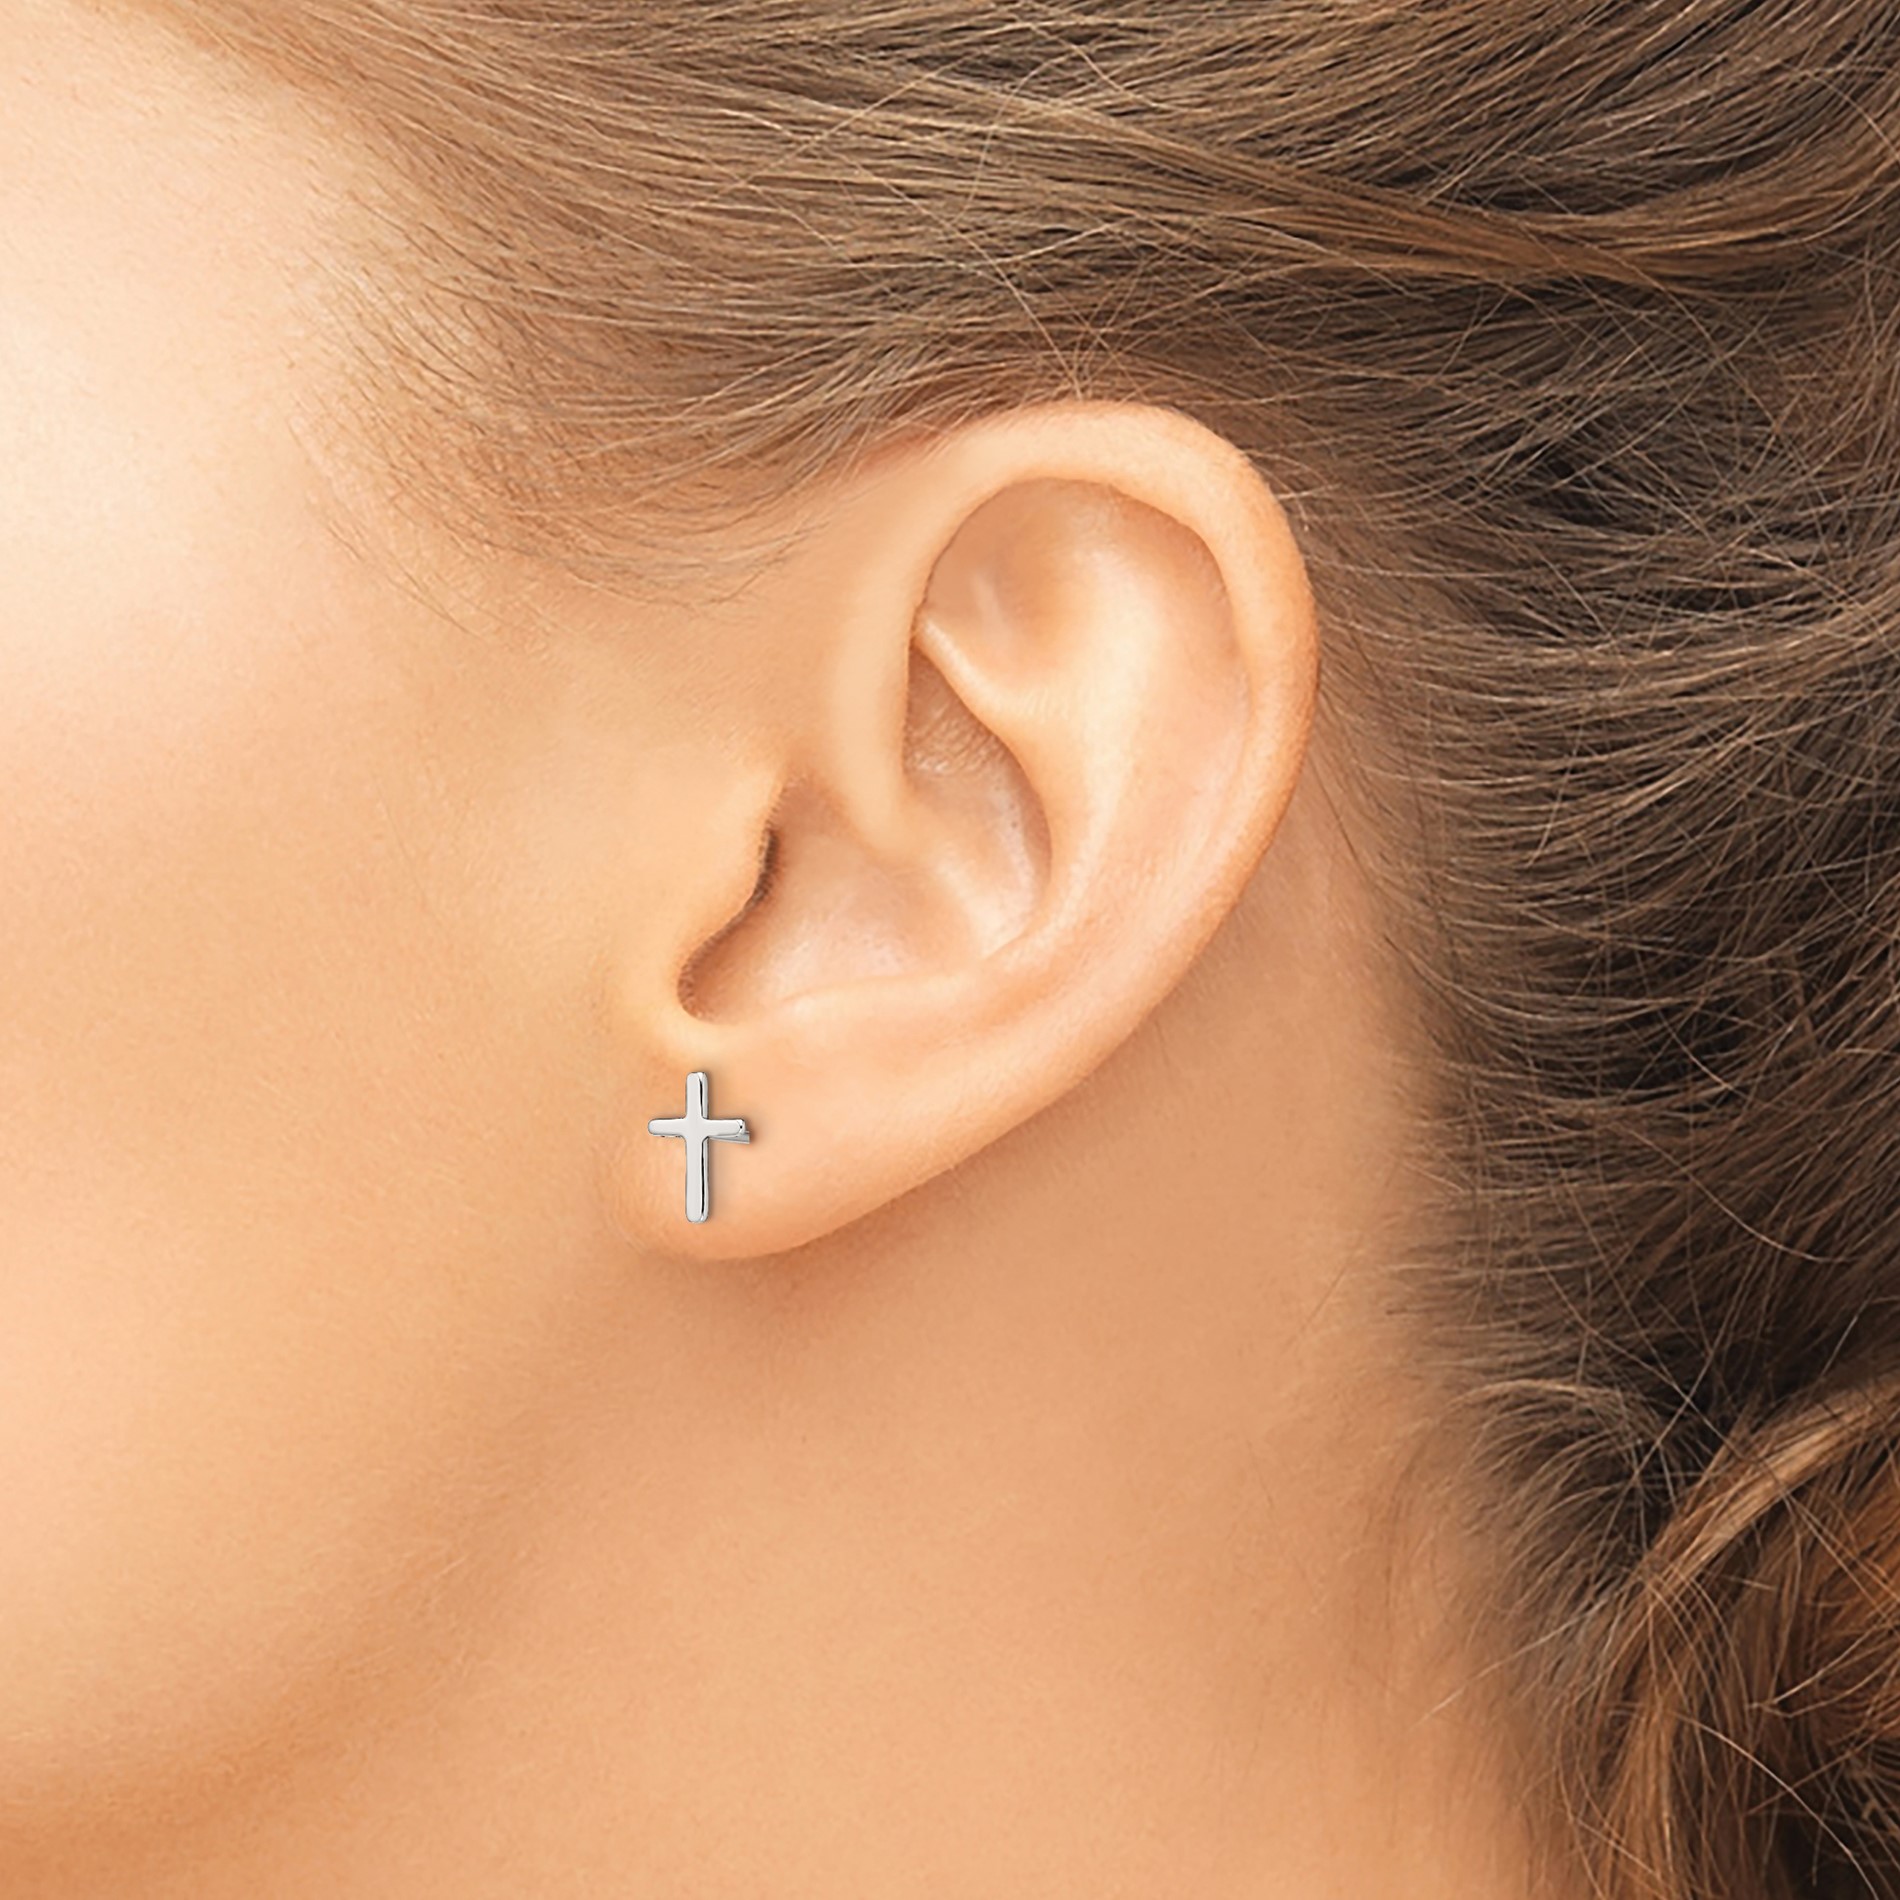 Diamond2Deal 925 Sterling Silver Polished and Antiqued 10mm Small Cross Stud Earrings for Women